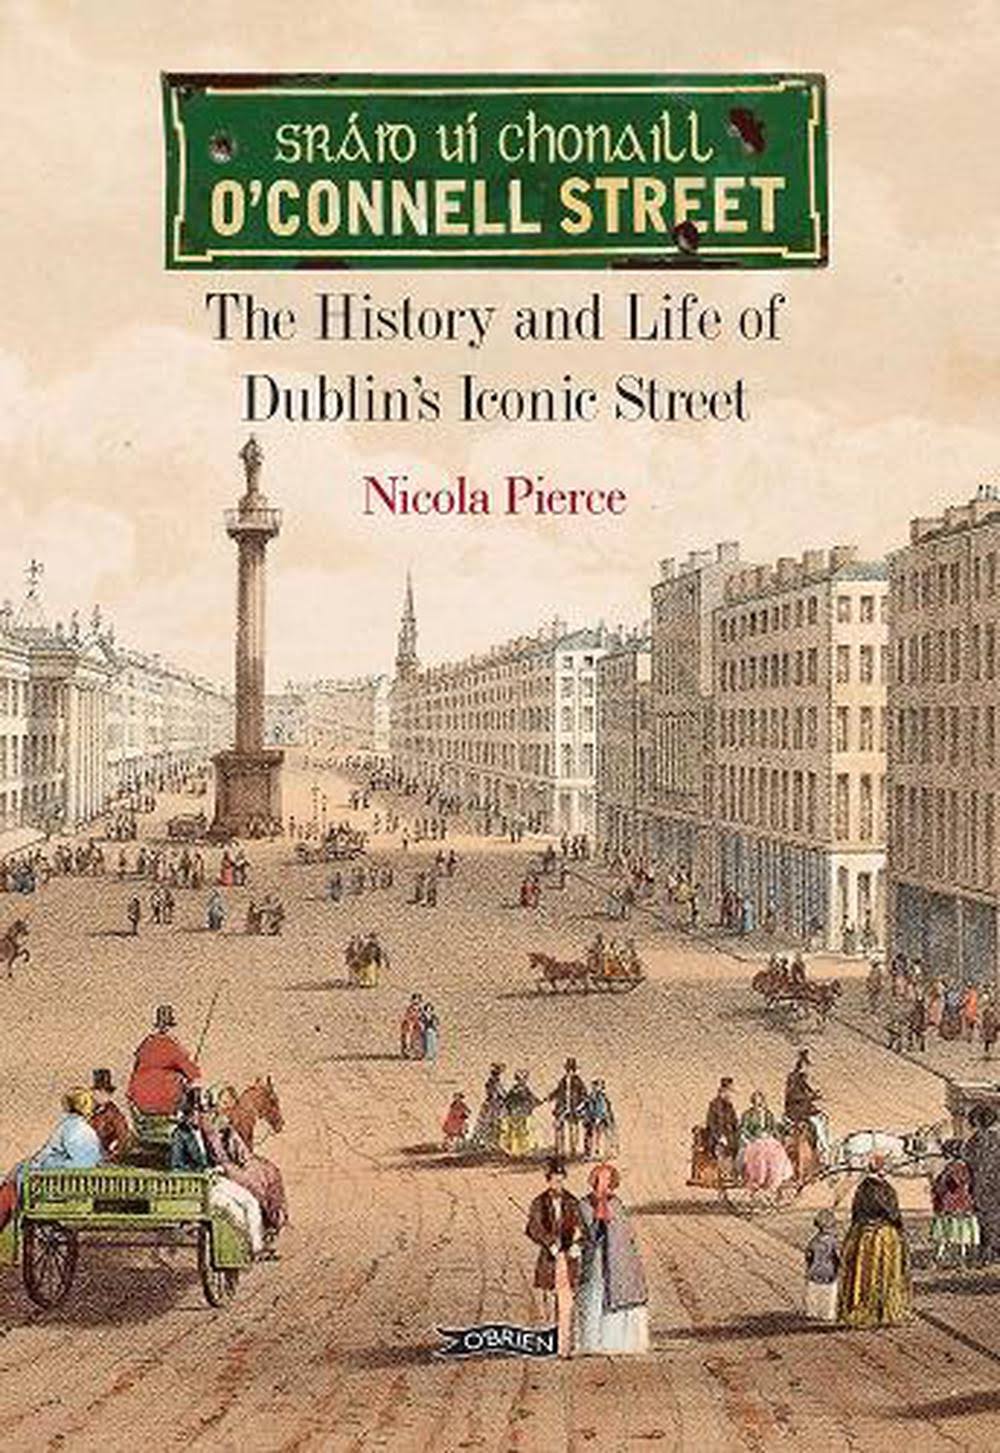 O'Connell Street: The History and Life of Dublin's Iconic Street [Book]